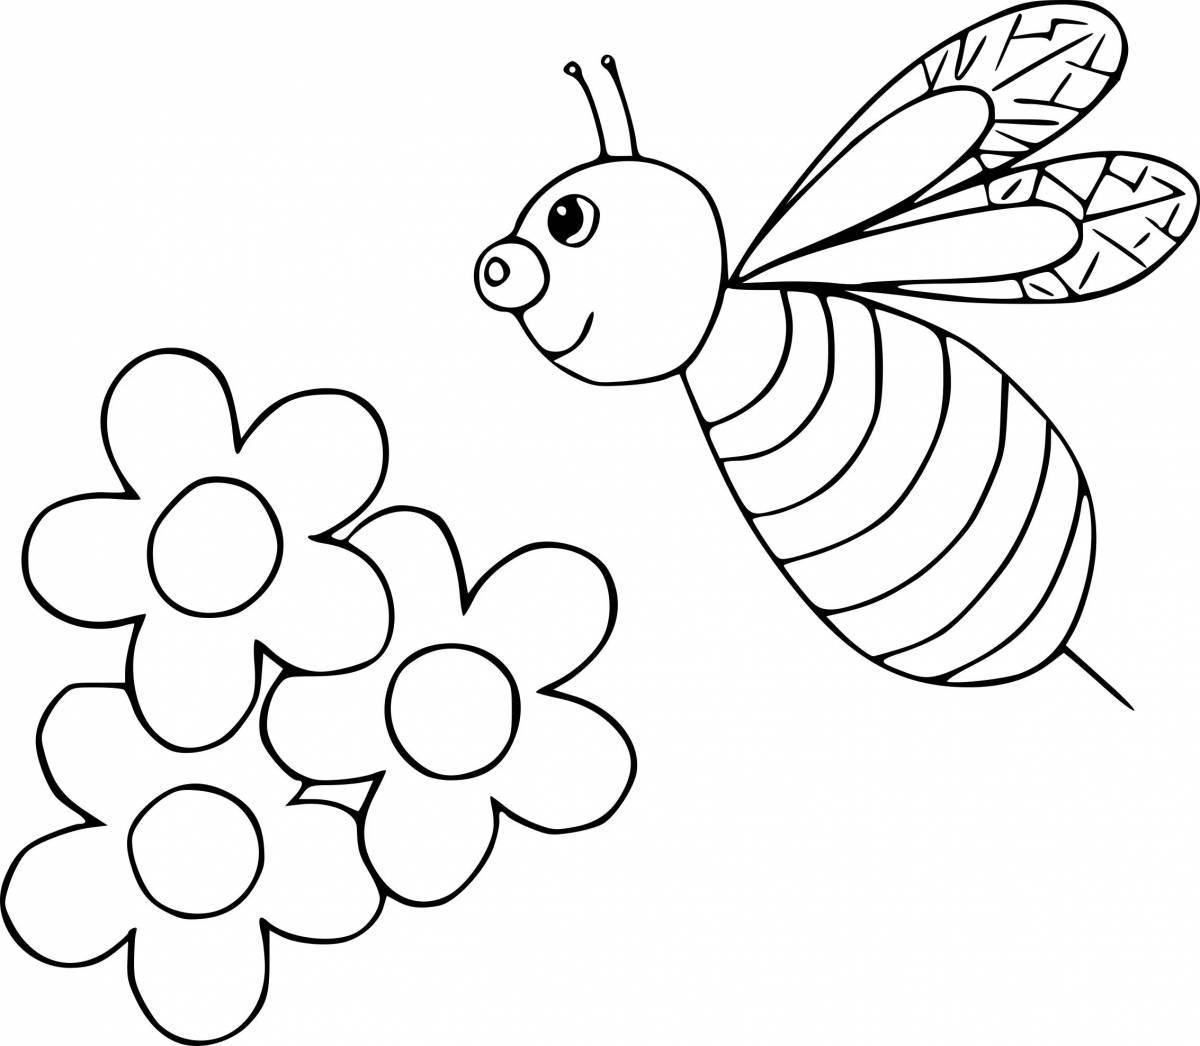 Amusing insect coloring pages for 3-4 year olds